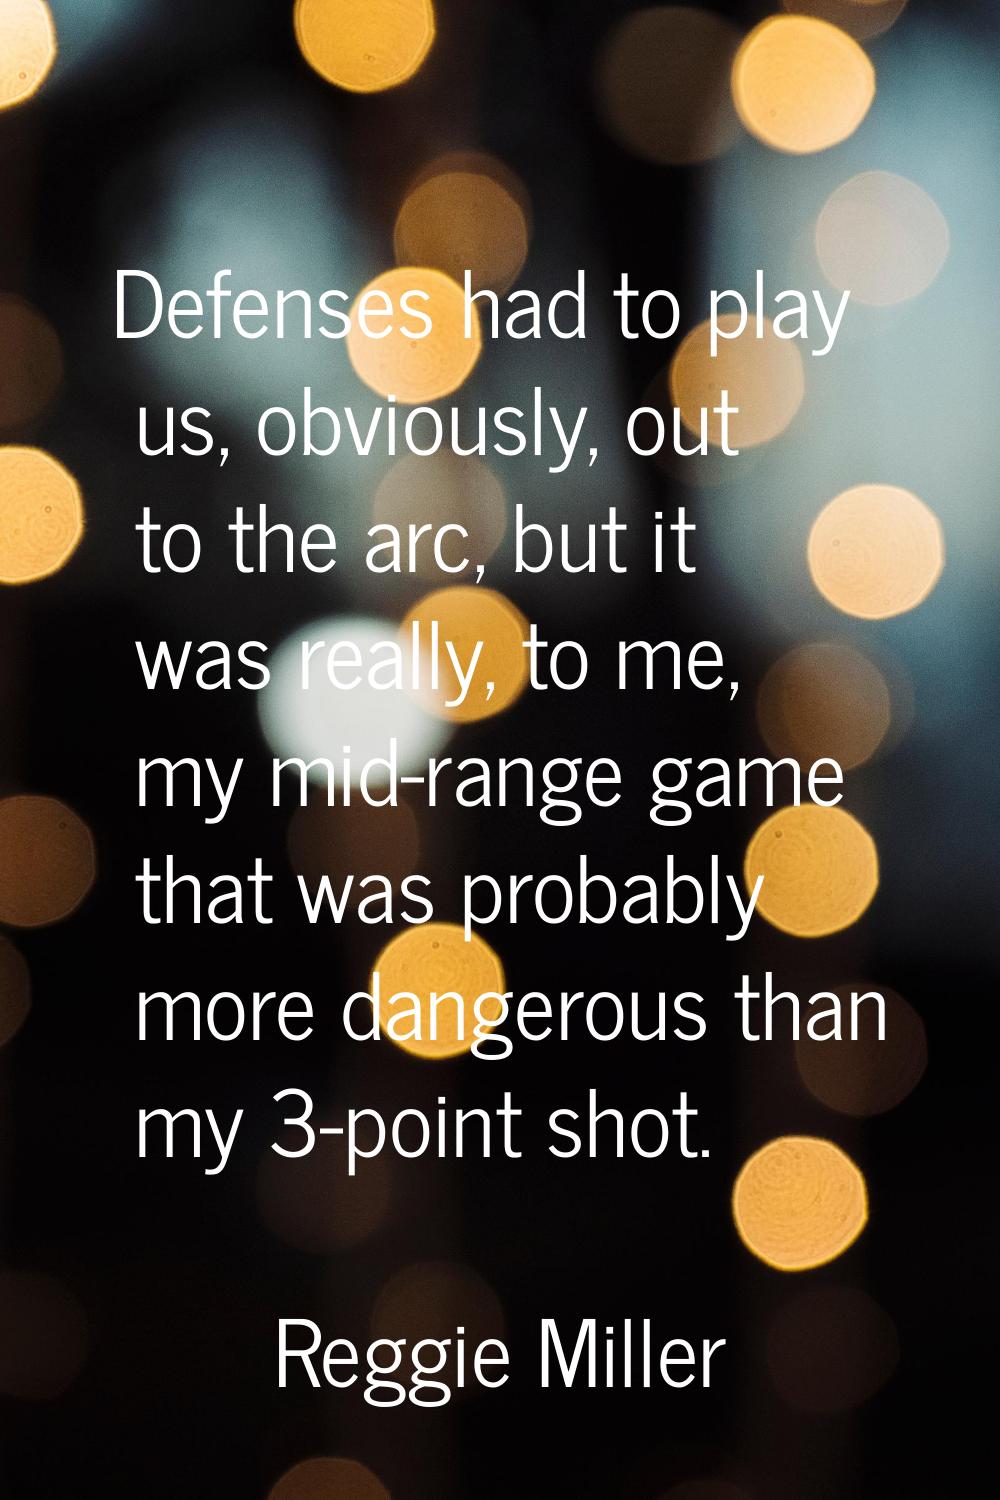 Defenses had to play us, obviously, out to the arc, but it was really, to me, my mid-range game tha